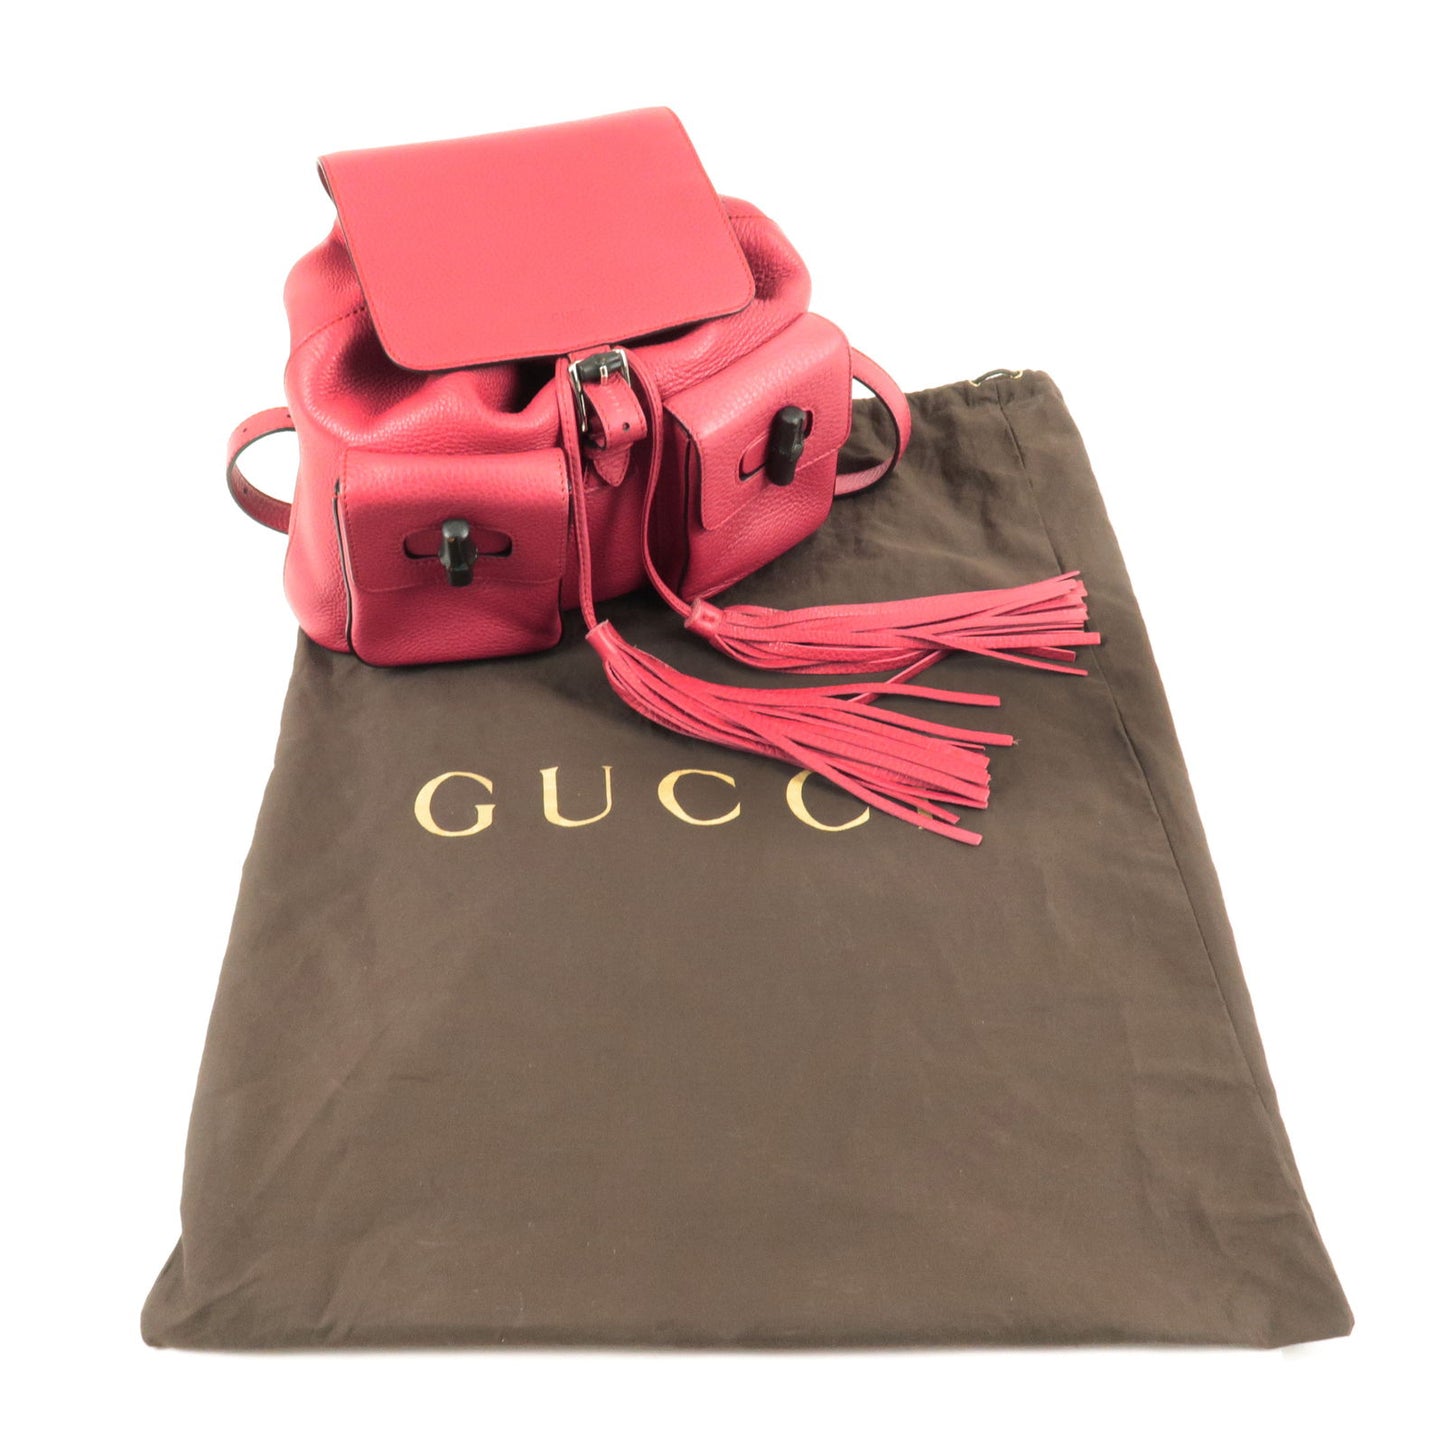 GUCCI Bamboo Back Pack With Fringe Leather Pink 370833